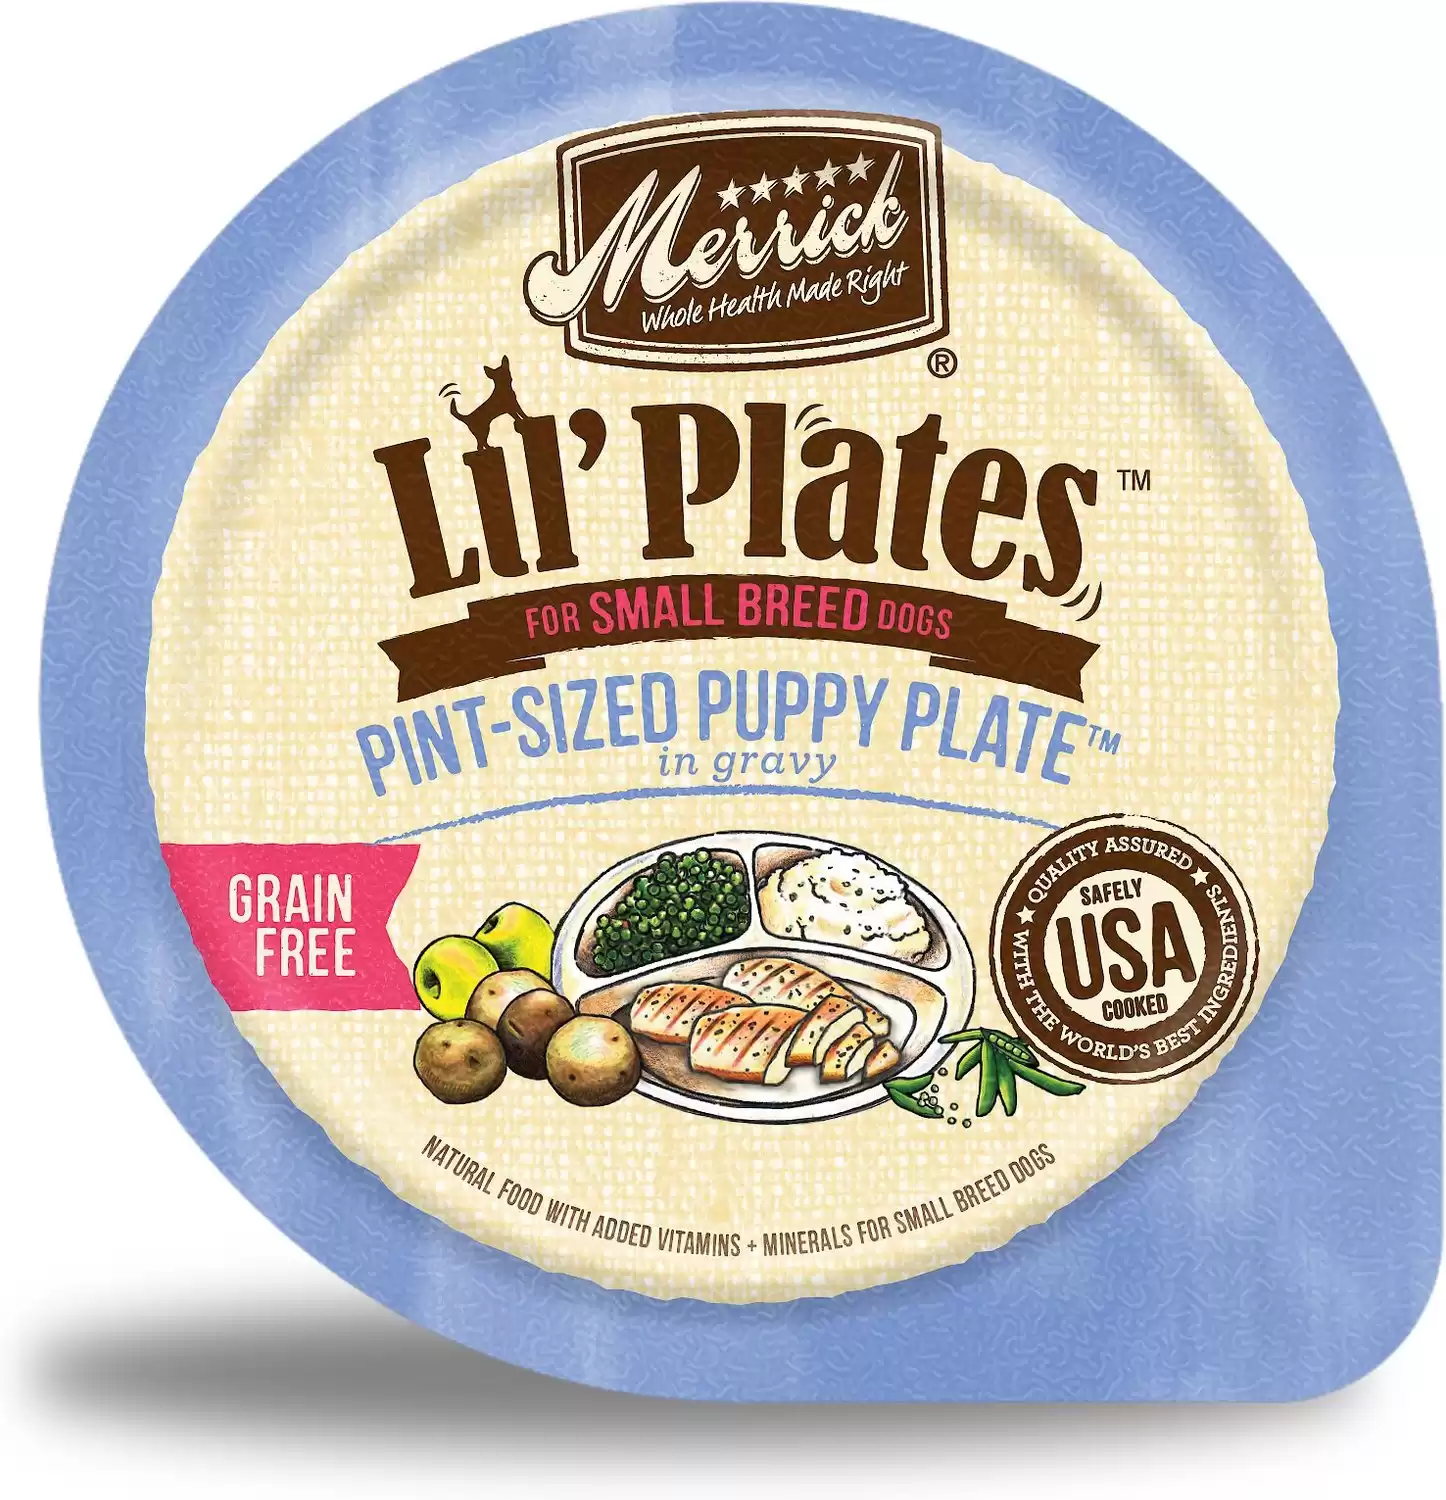 Merrick Lil' Plates Grain-Free Small Breed Wet Dog Food Pint-Sized Puppy Plate, 3.5-oz tub, case of 12